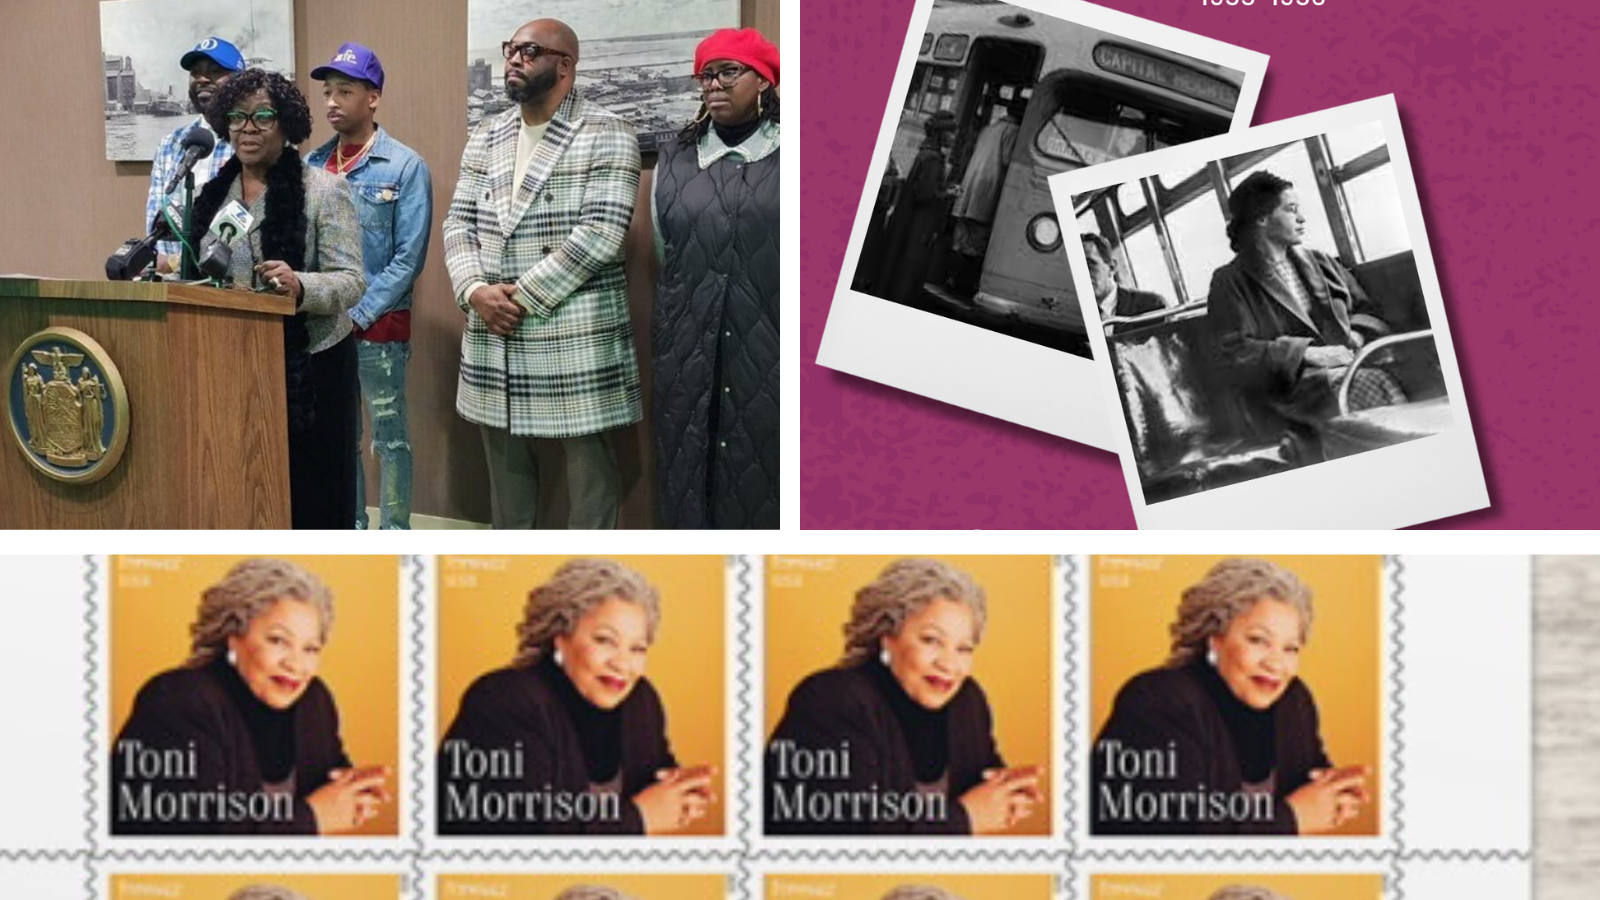 Weekend Reading on Women’s Representation: Remembering Women Civil Rights Leaders; Toni Morrison’s New USPS Forever Stamp